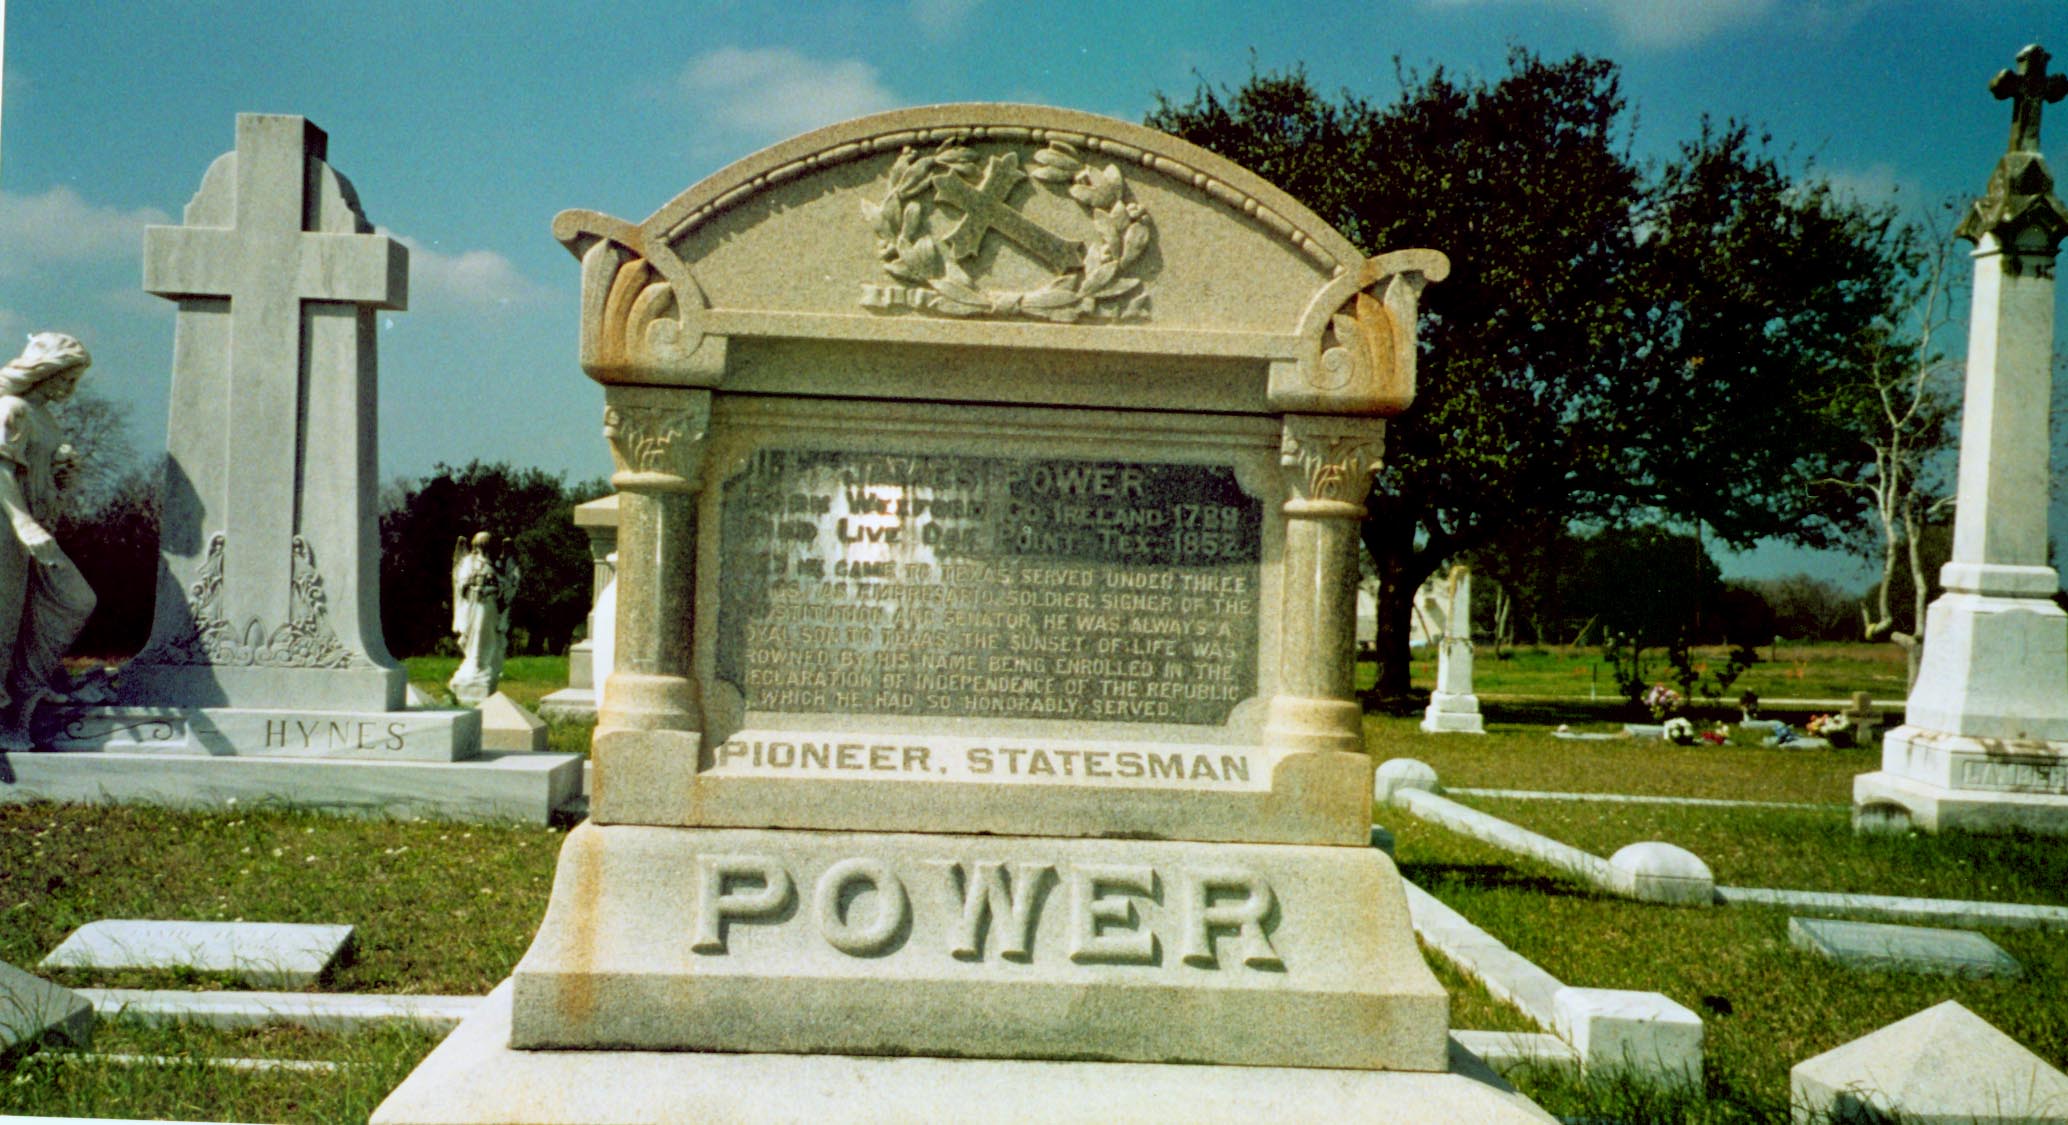 In front of James Power's grave 